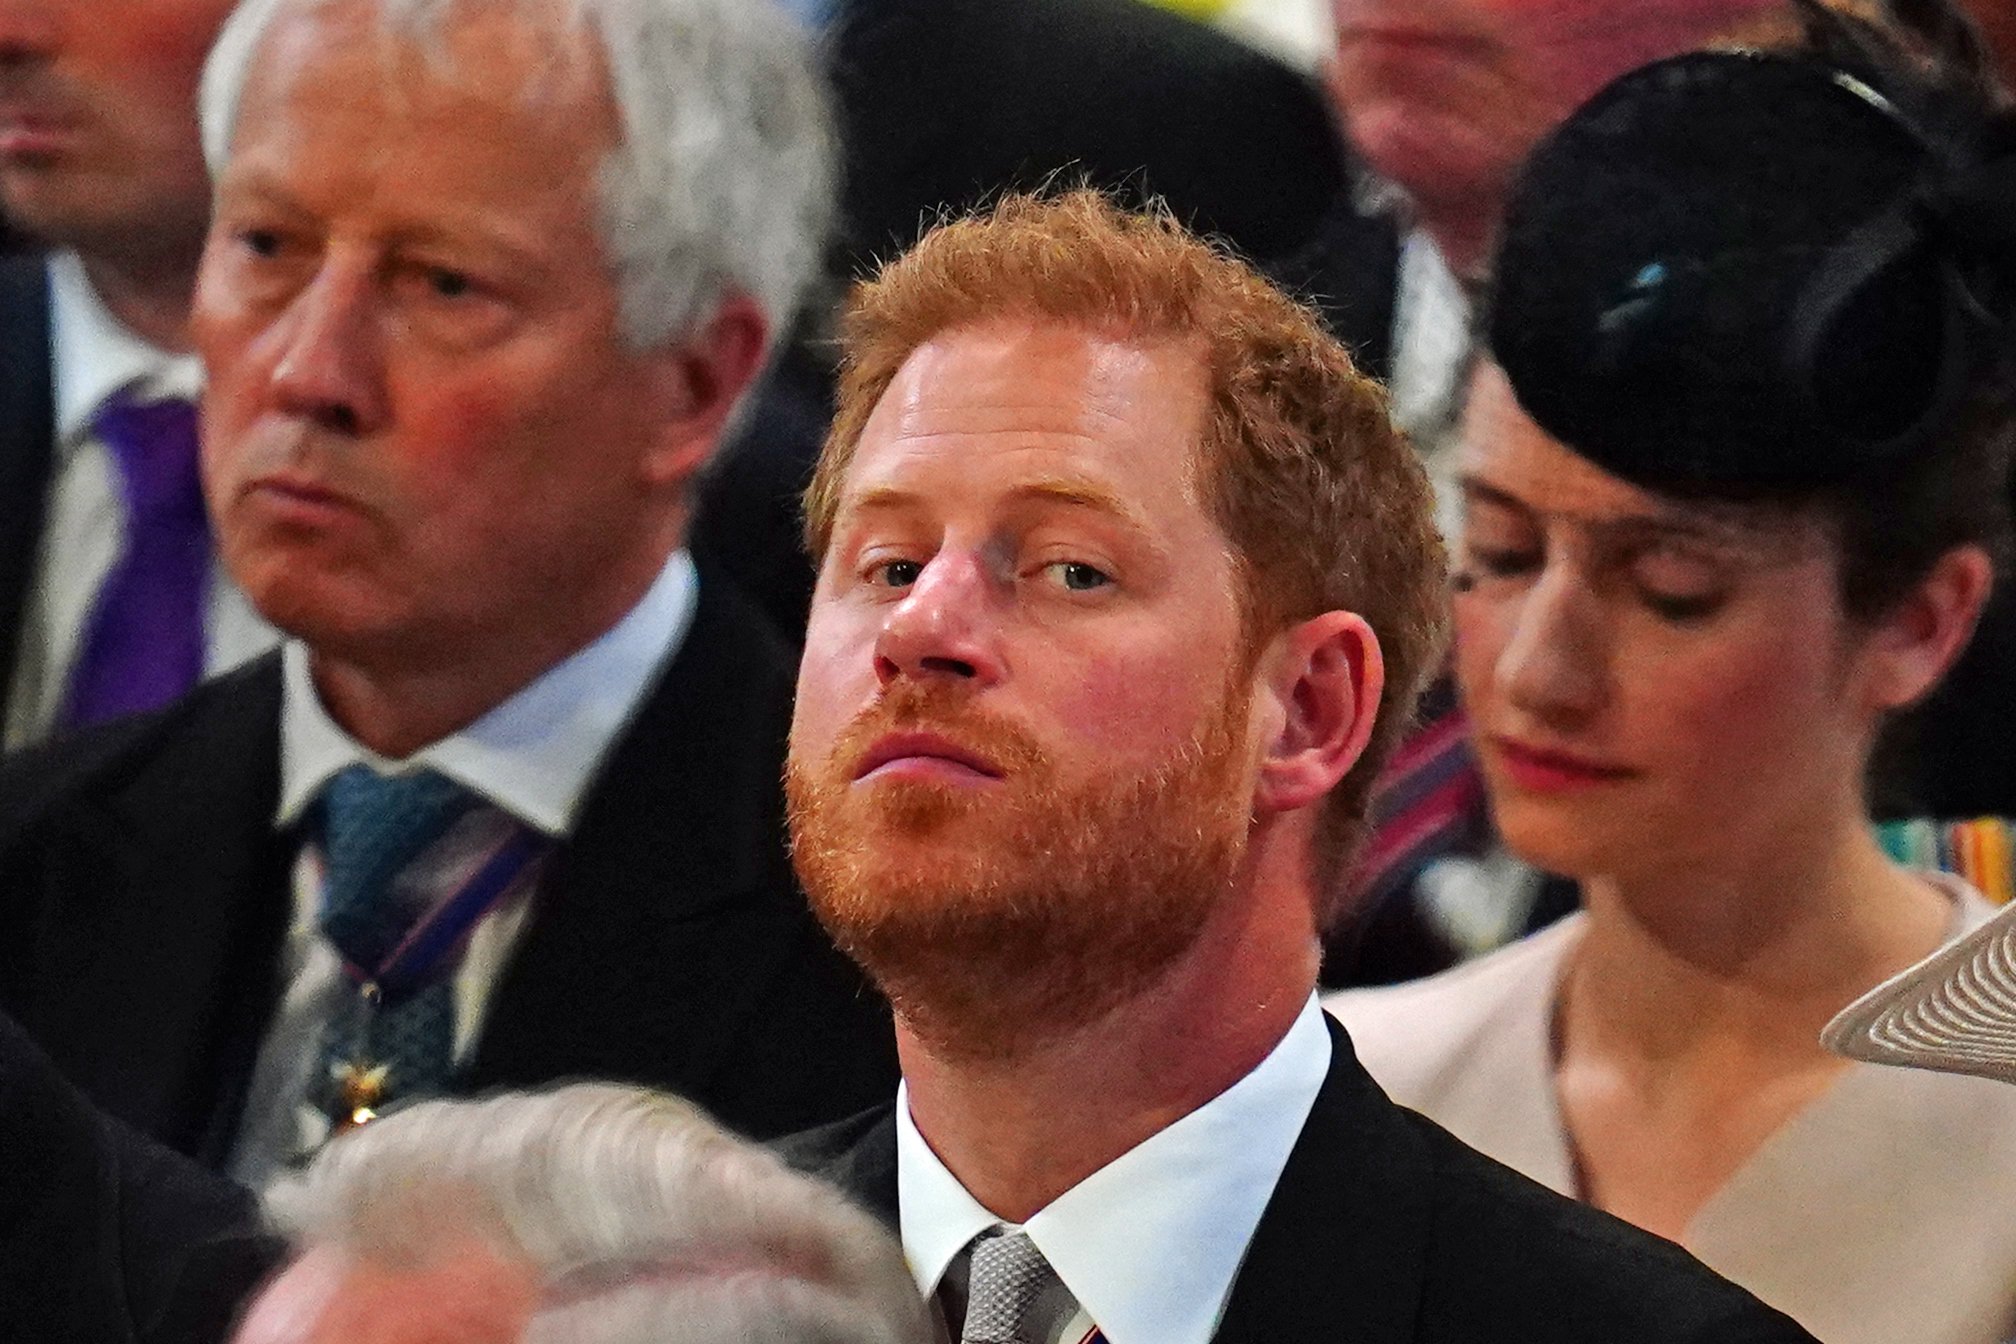 Prince Harry at the National Service of Thanksgiving to celebrate the Platinum Jubilee of the Queen at St Paul's Cathedral on June 3, 2022, in London, England. | Source: Getty Images